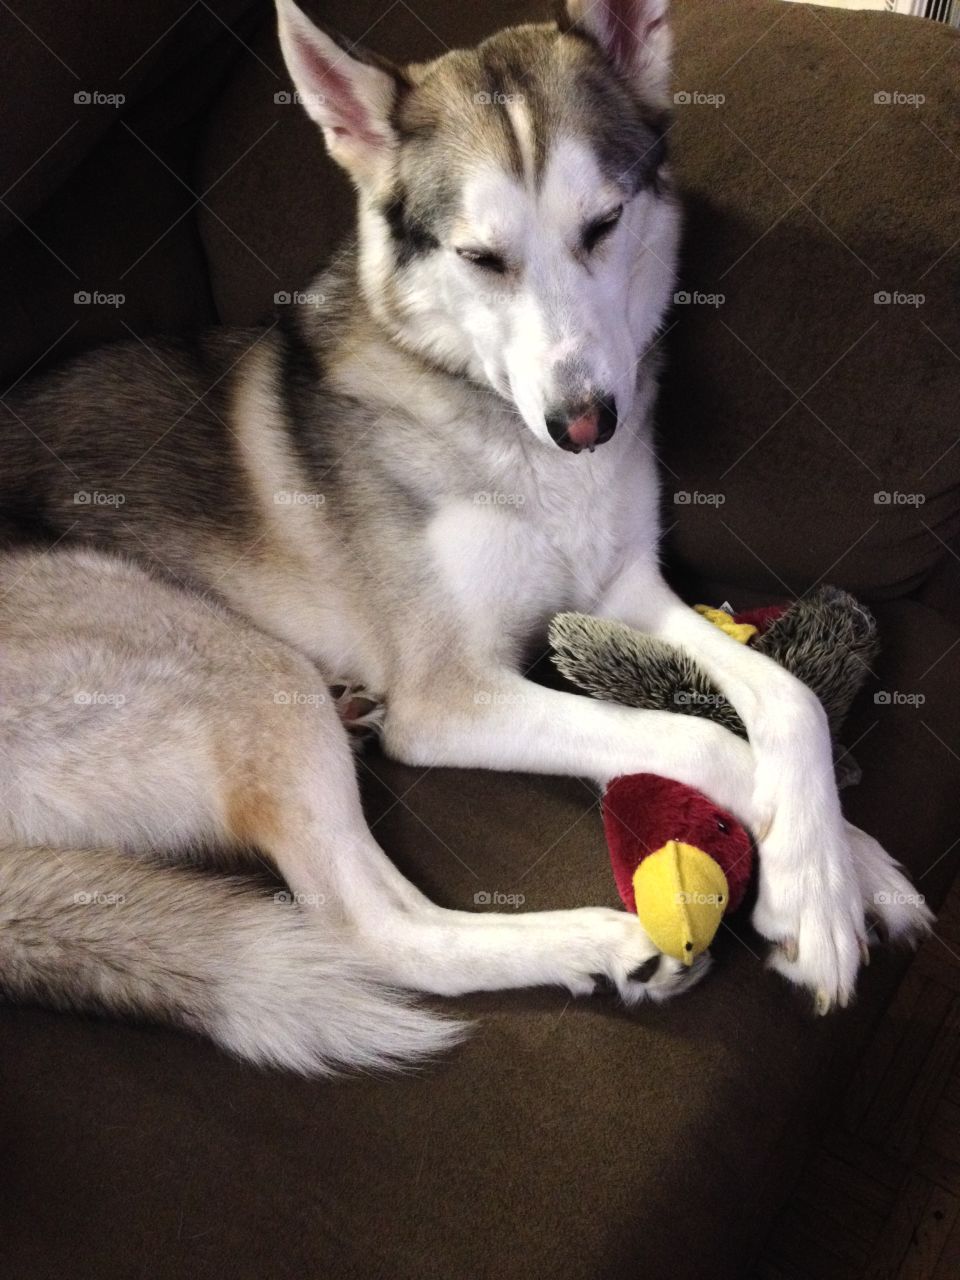 Husky falling asleep and protecting its toy. 